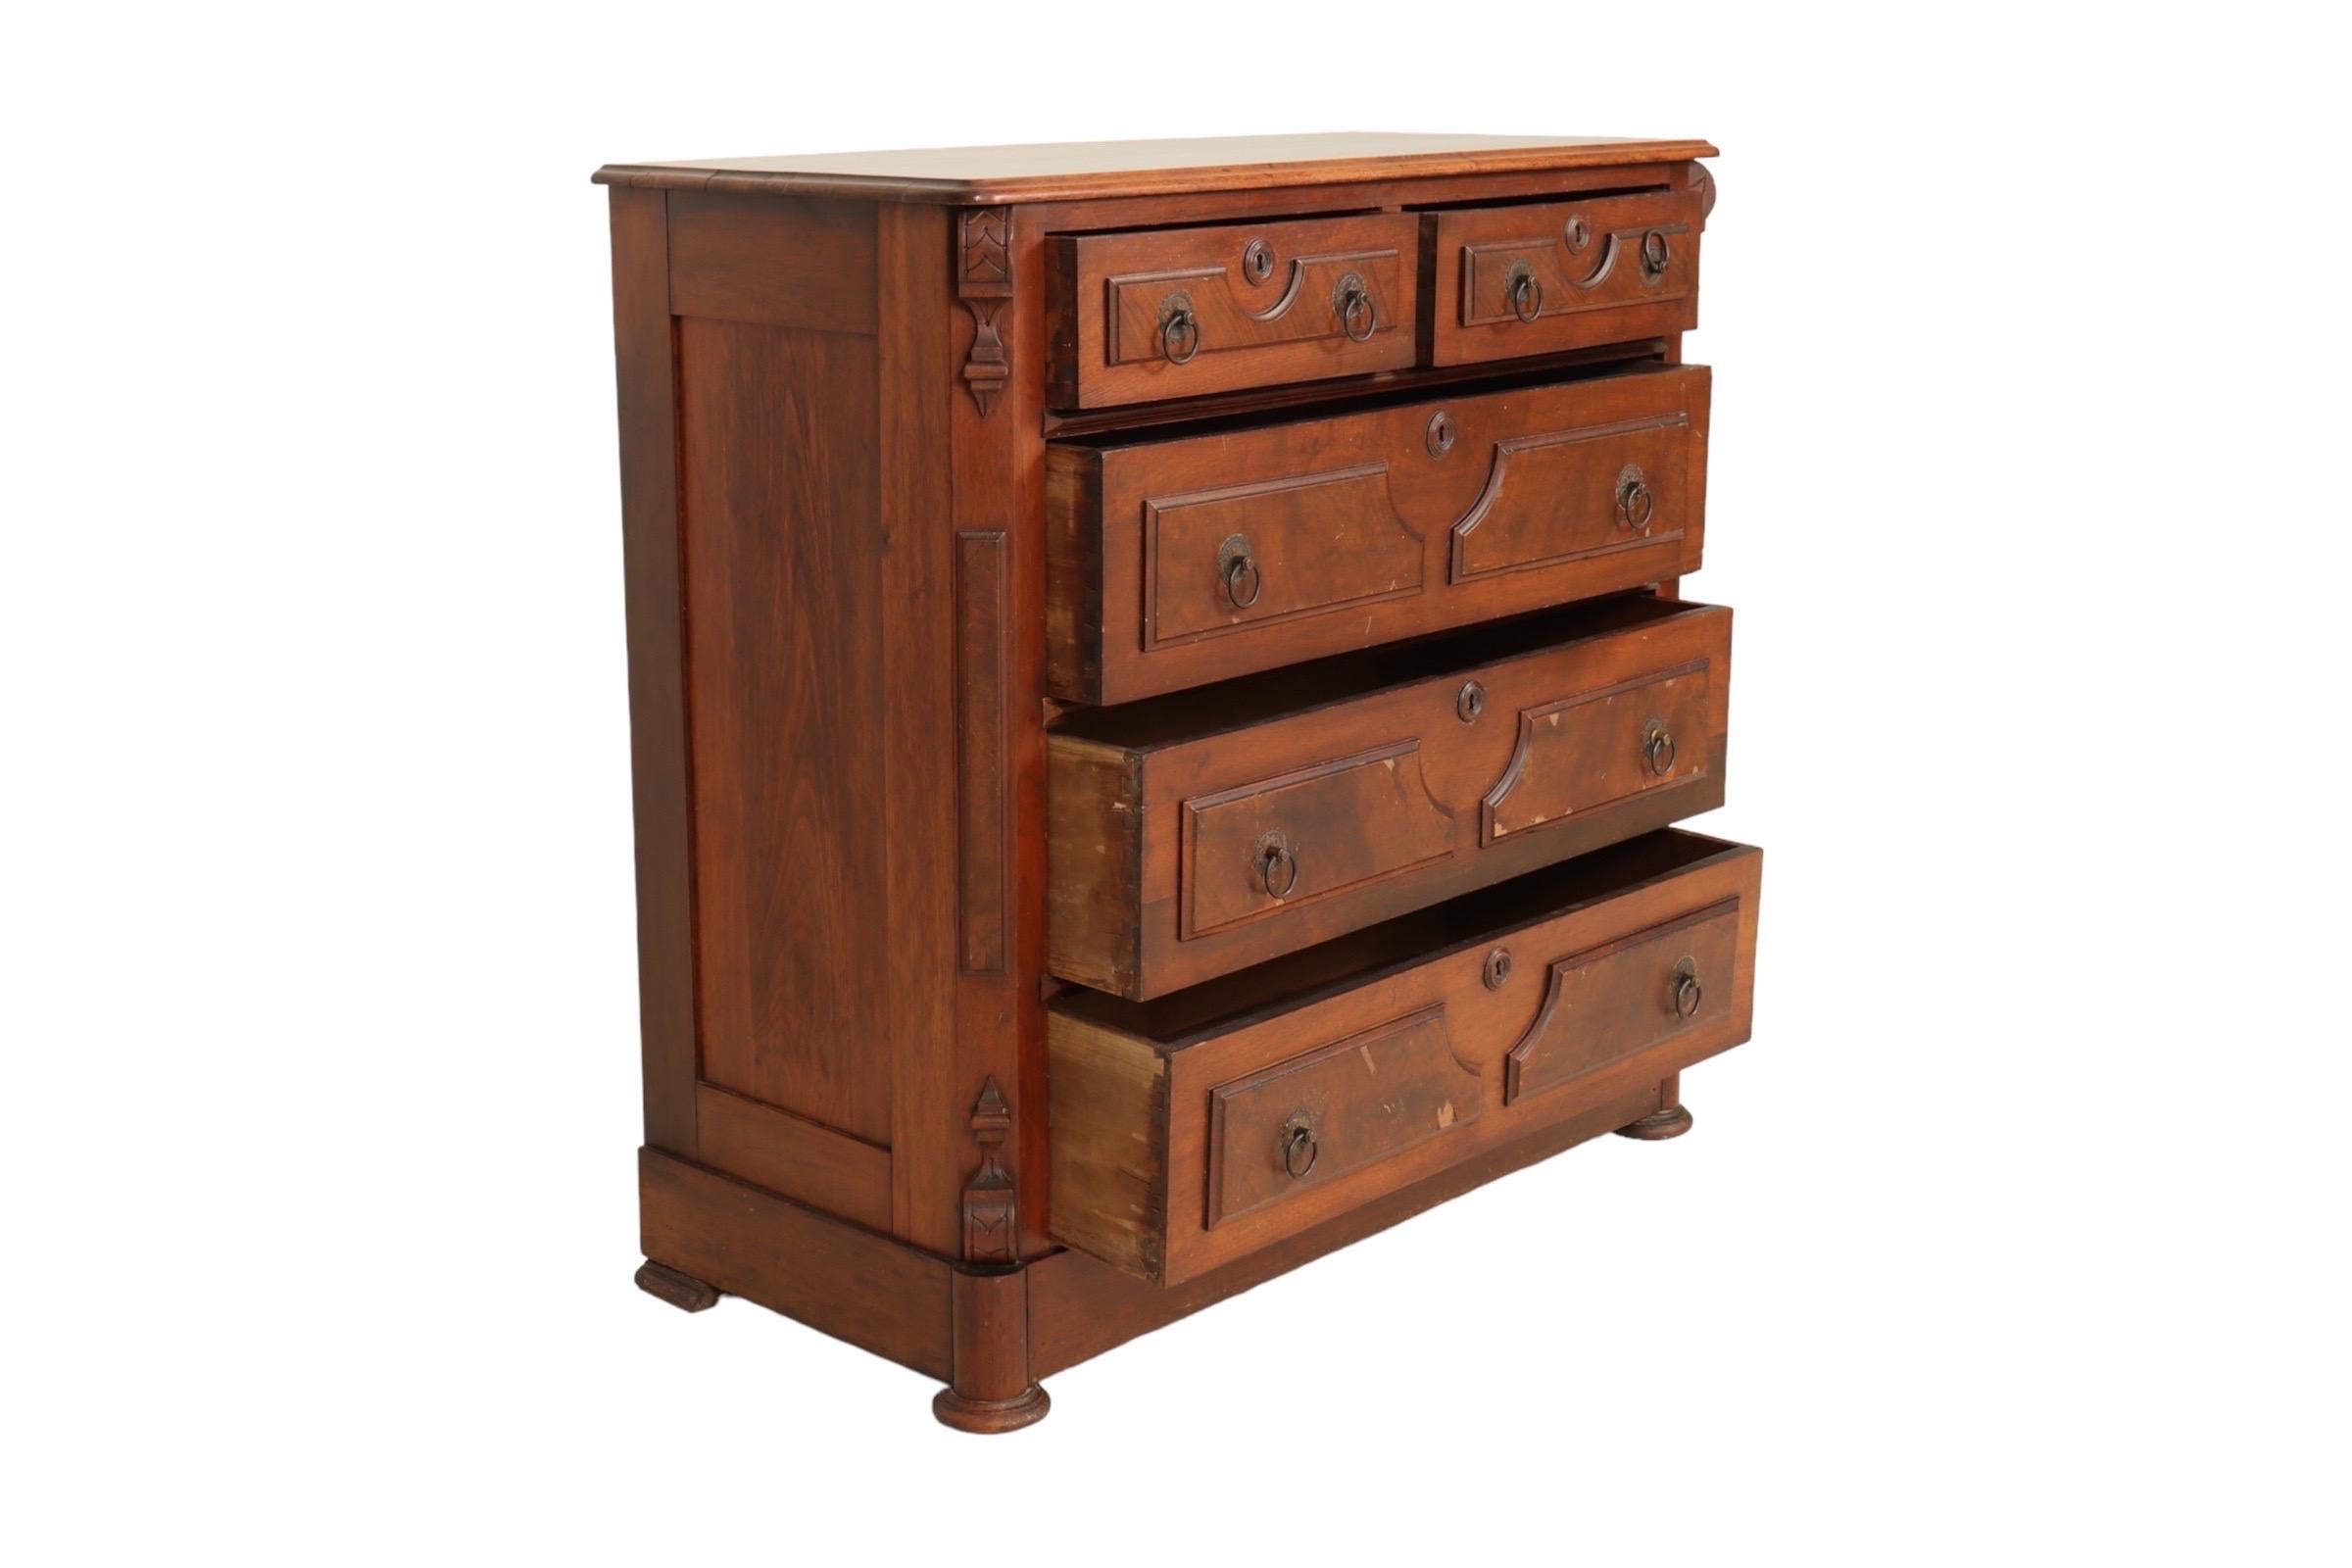 An early 20th century chest of drawers made of walnut. Two small drawers above three long drawers each have symmetrical wooden veneer panels with beveled surrounds and brass drop hoop handles on decorative round back plates. The Eastlake style